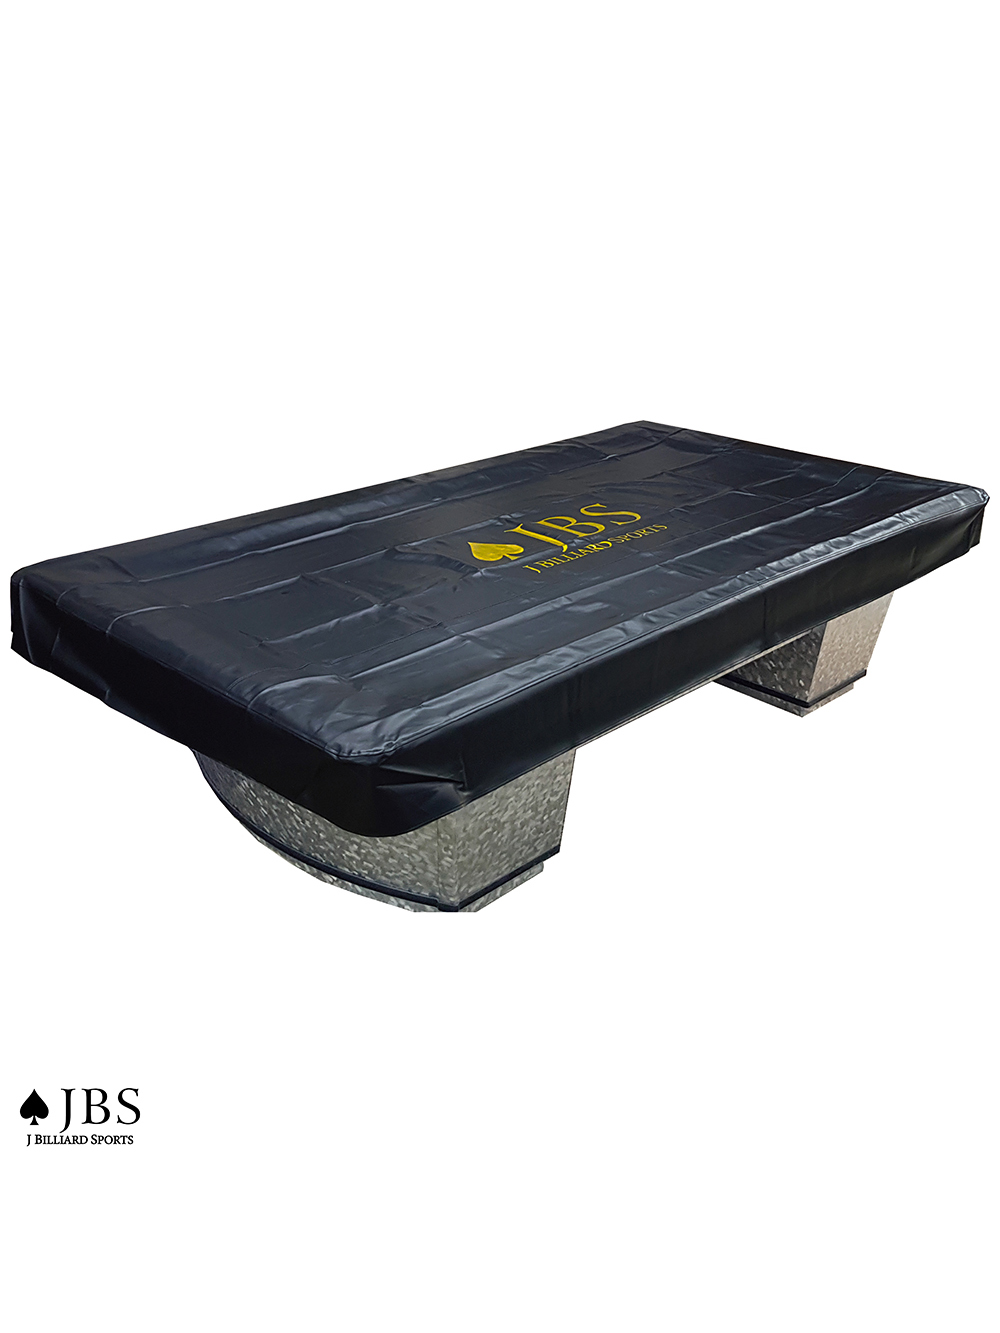 ♠JBS Carom Table Cover